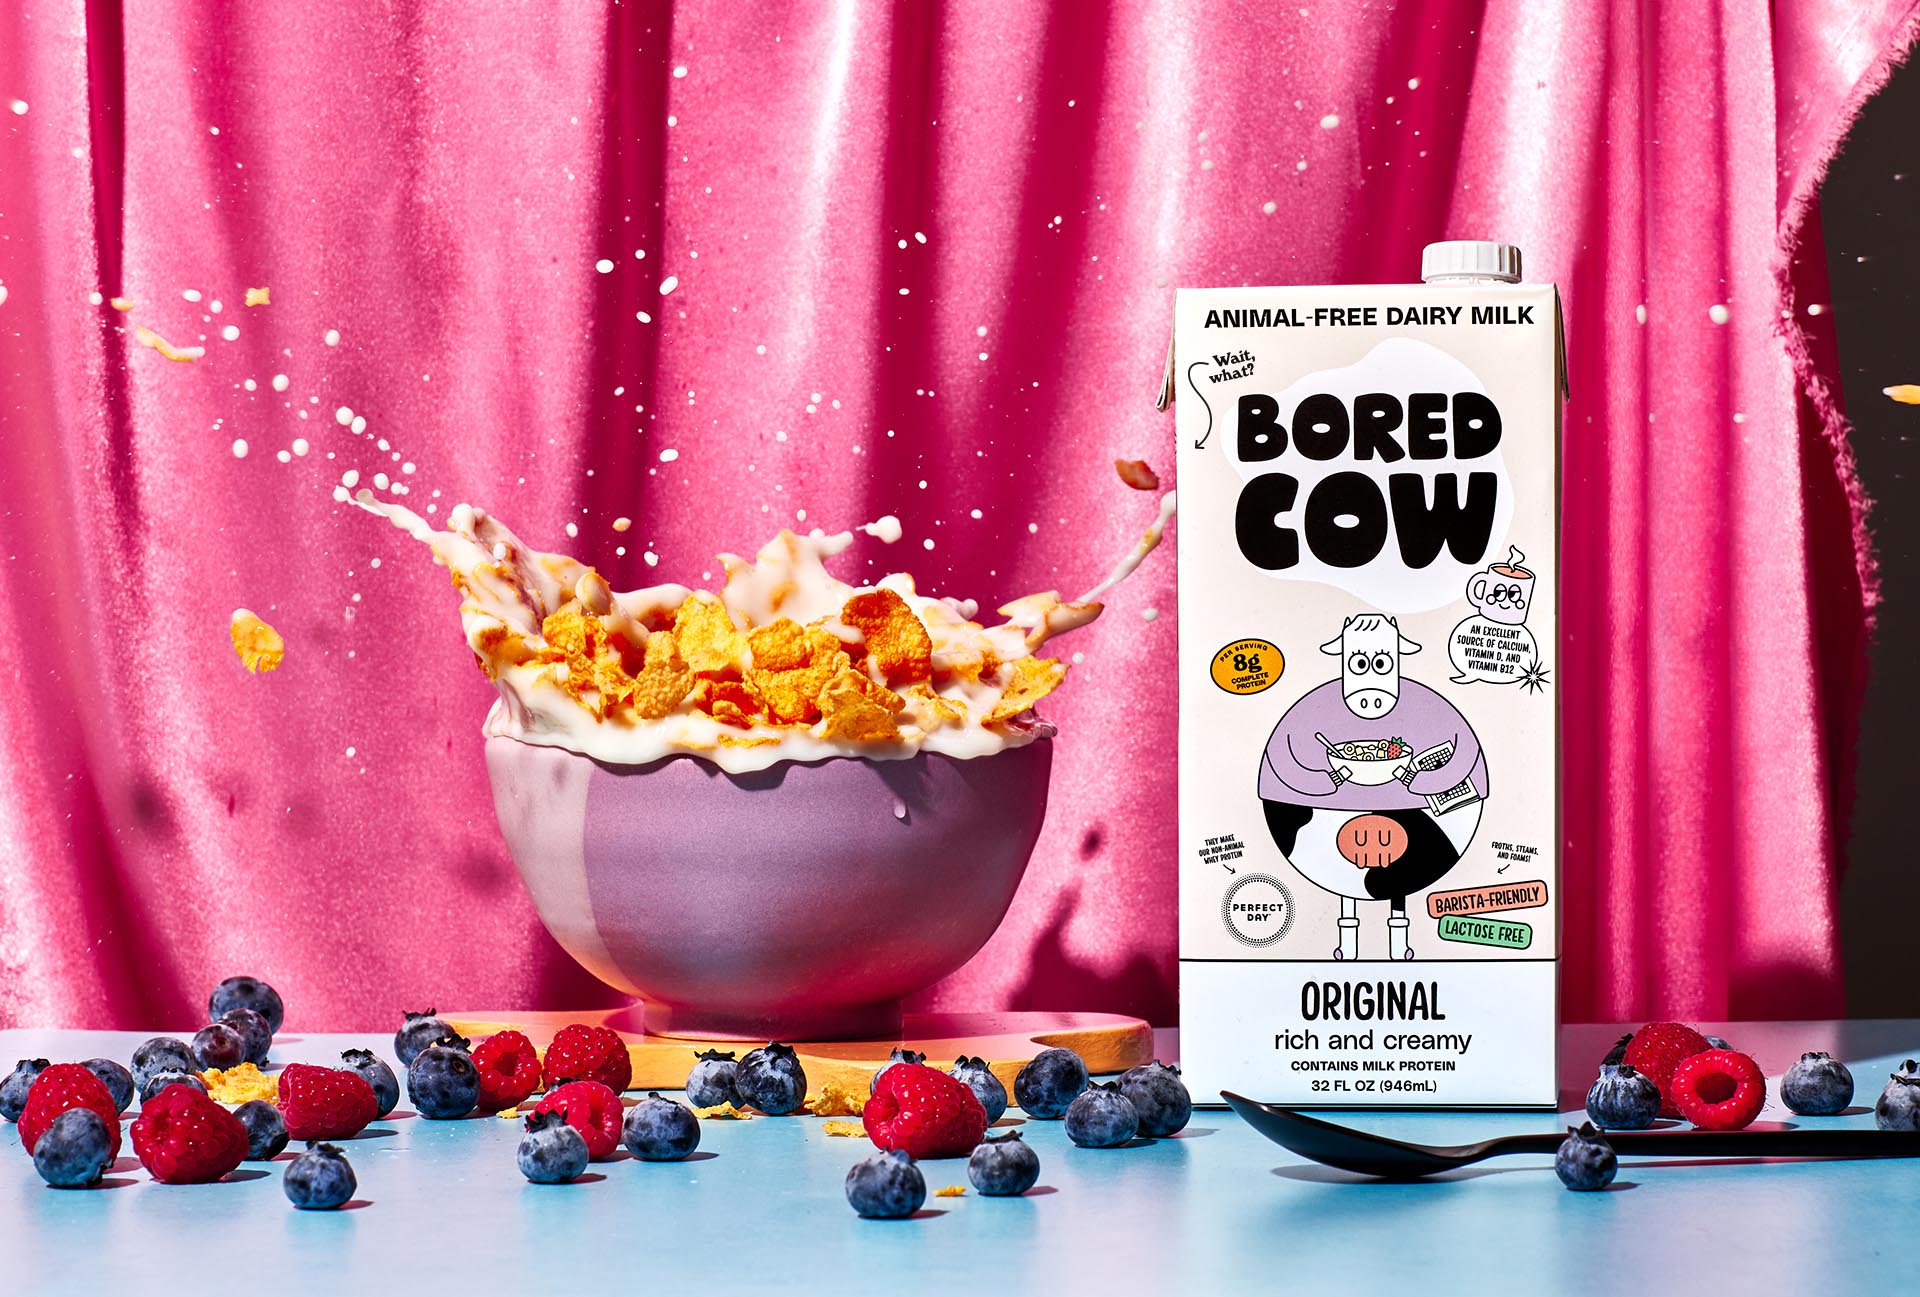 bowl of cereal with milk splashing out of it, to the right is a 32 oz carton of Bored Cow Original flavor animal-free dairy milk